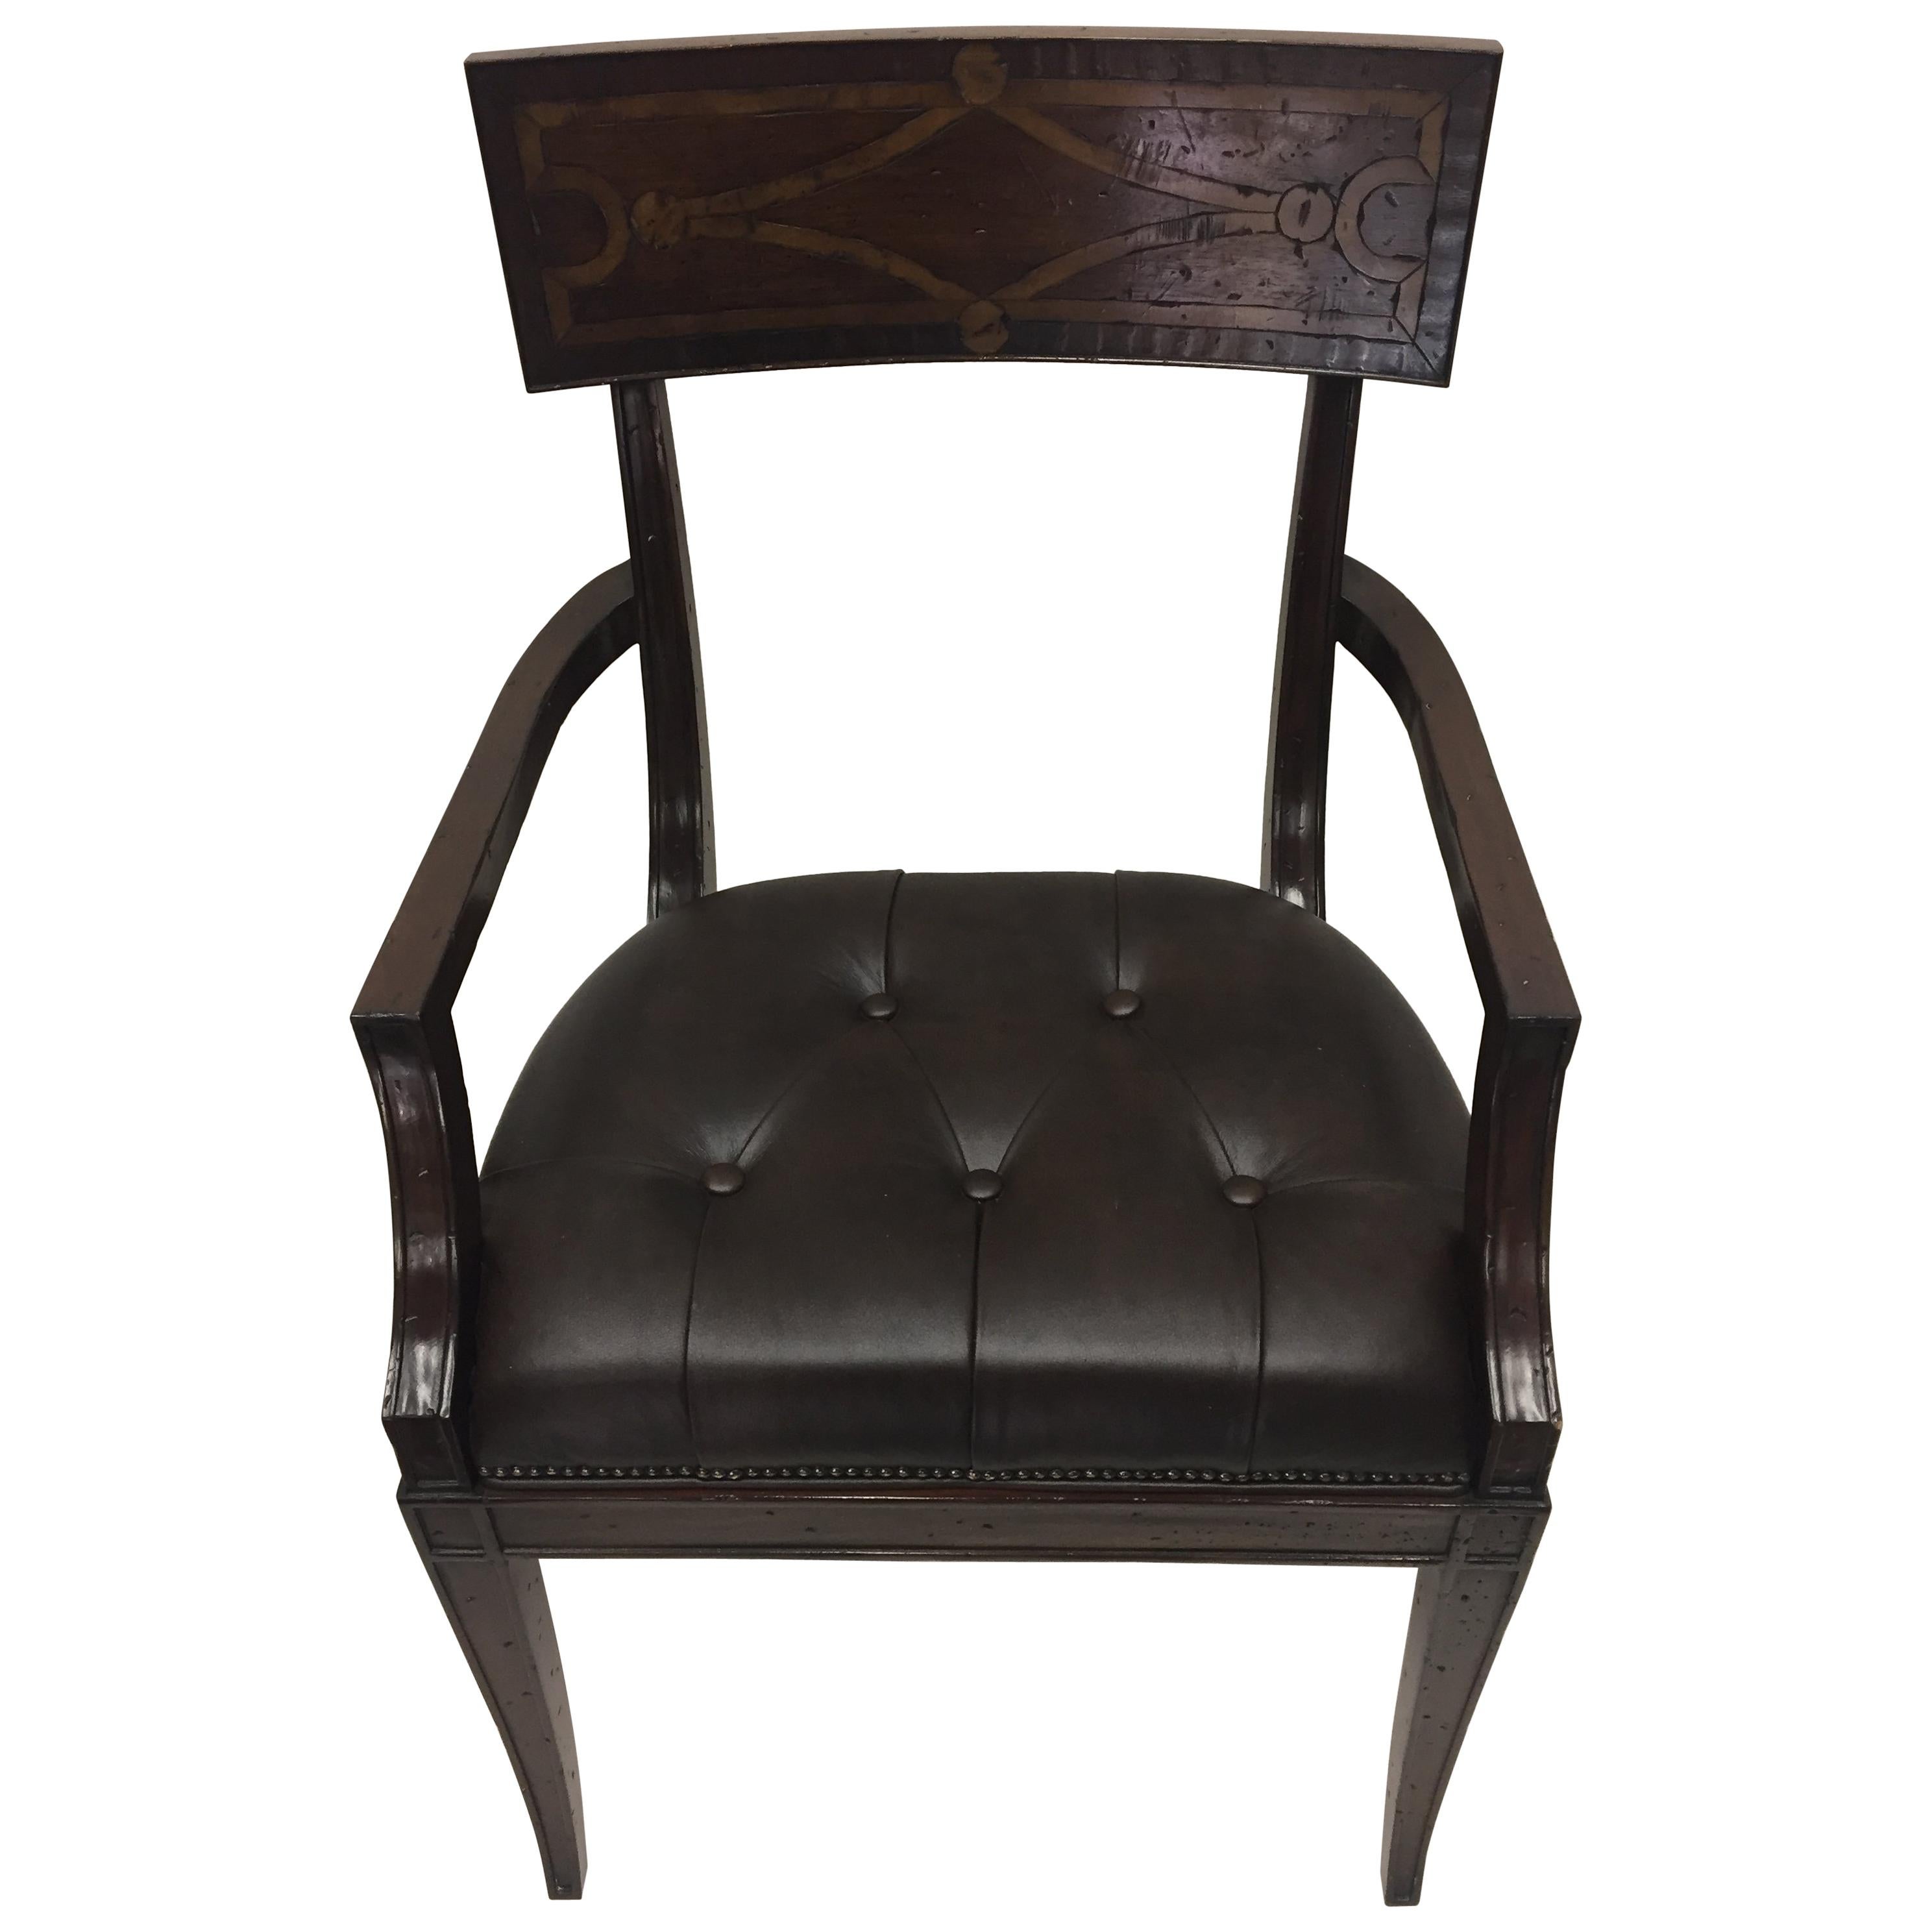 Regency Style Mahogany and Tufted Leather Armchair